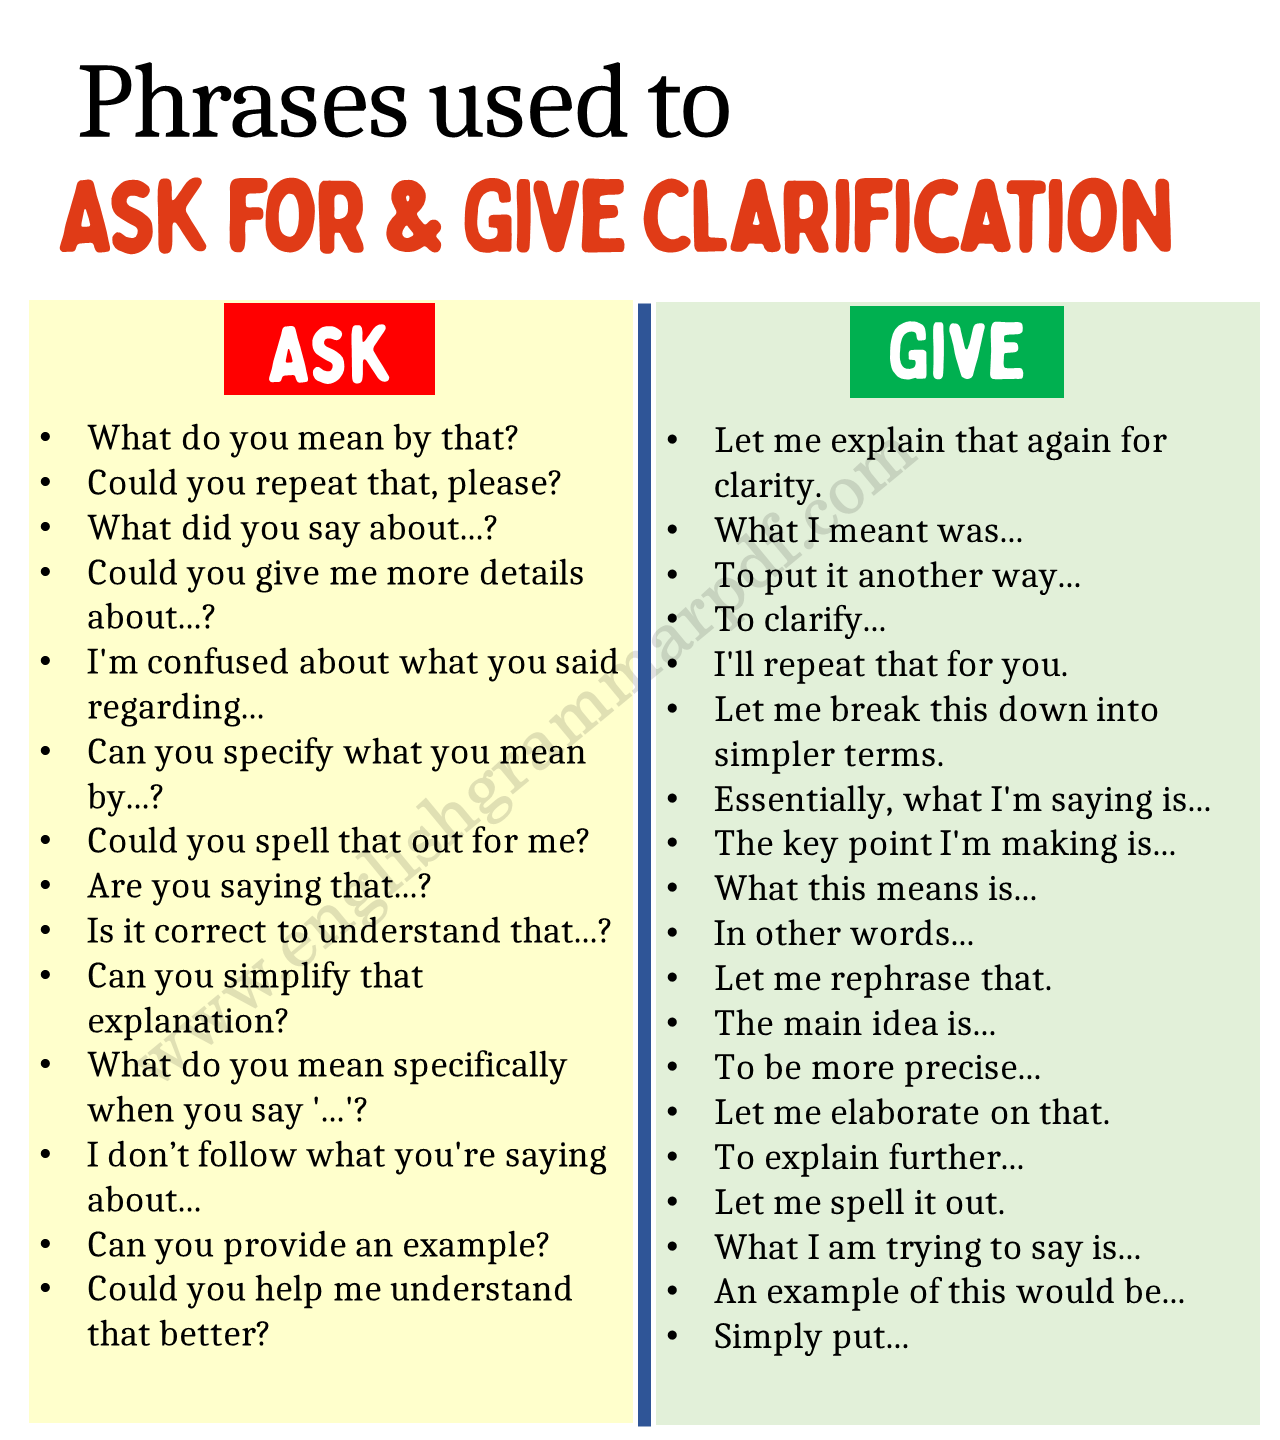 How to Ask for & Give Clarification in English